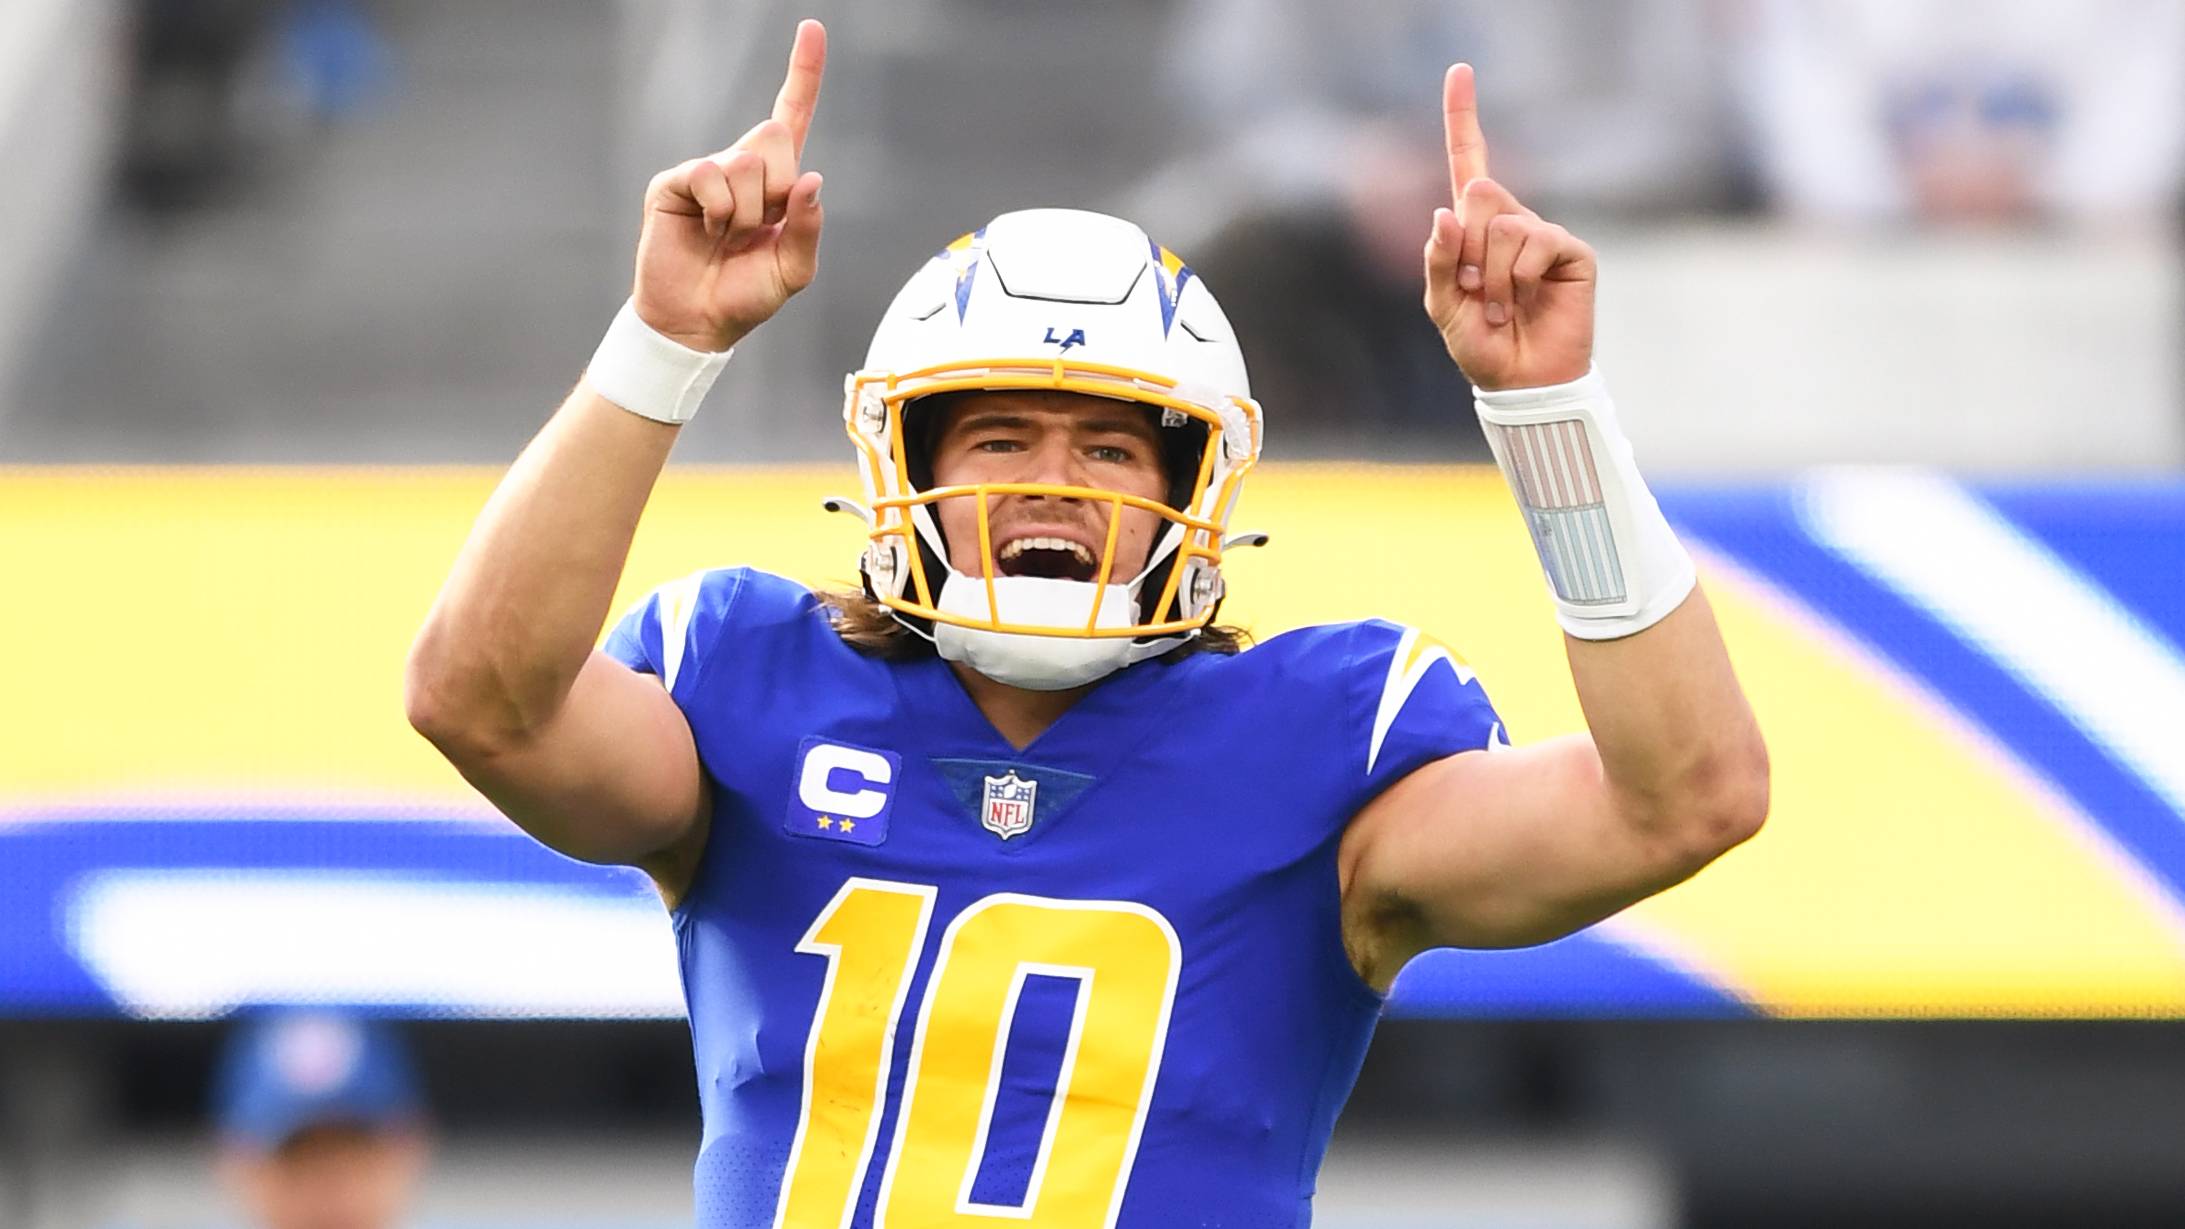 Los Angeles Chargers vs. San Francisco 49ers: Date, kick-off time, stream info and how to watch the NFL on DAZN